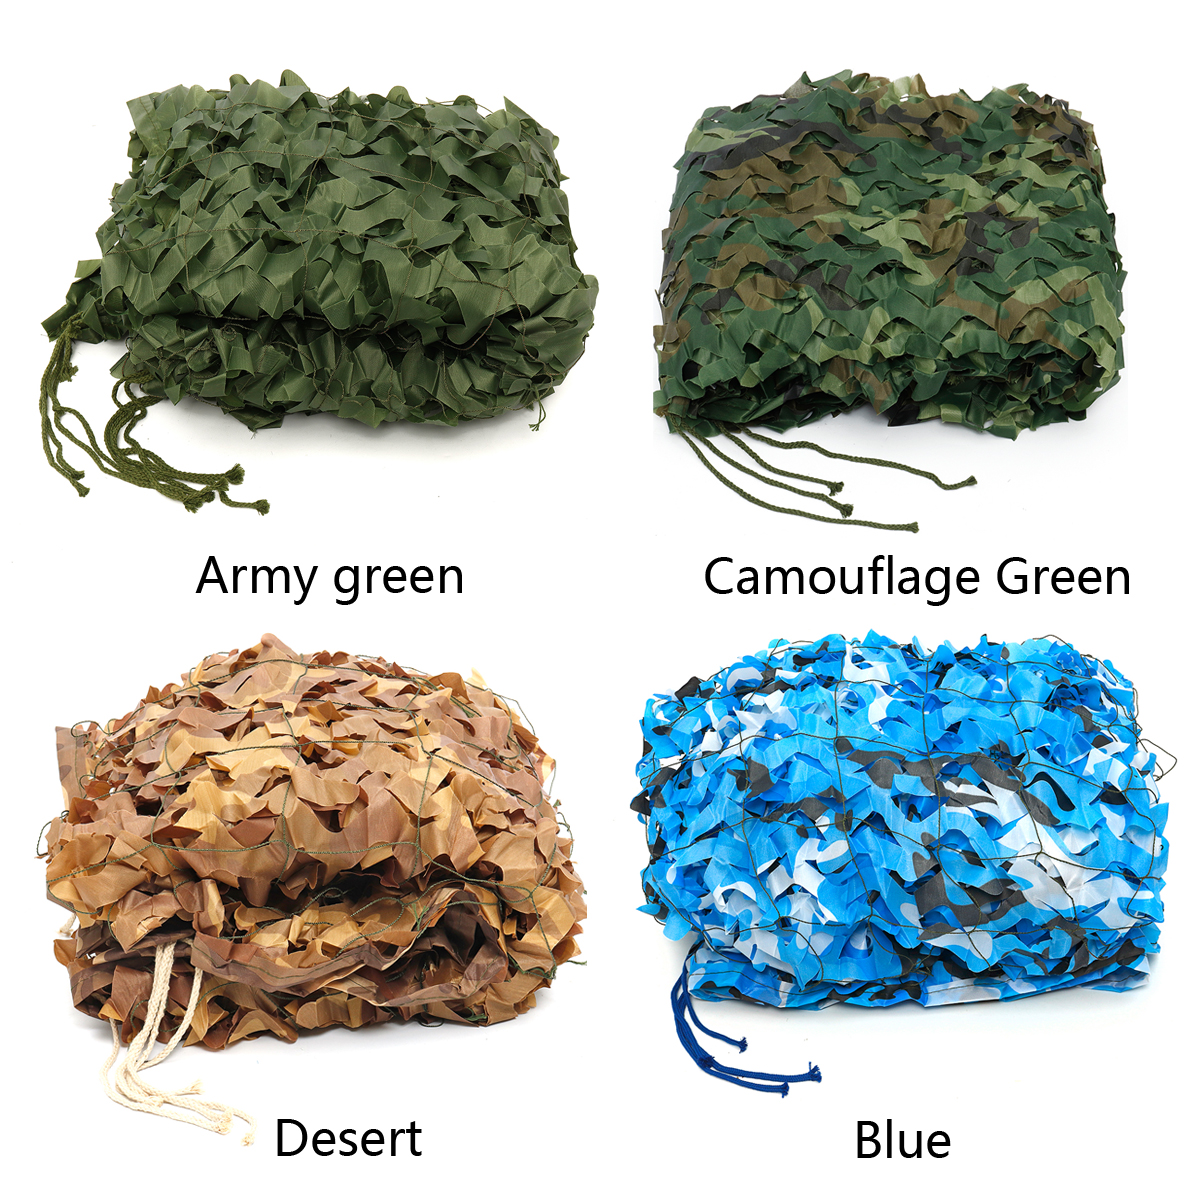 Camouflage-Army-Green-Trap-Net-Military-Hunting-Trap-Woodland-Leaves-Sunshade-Net-1556941-2